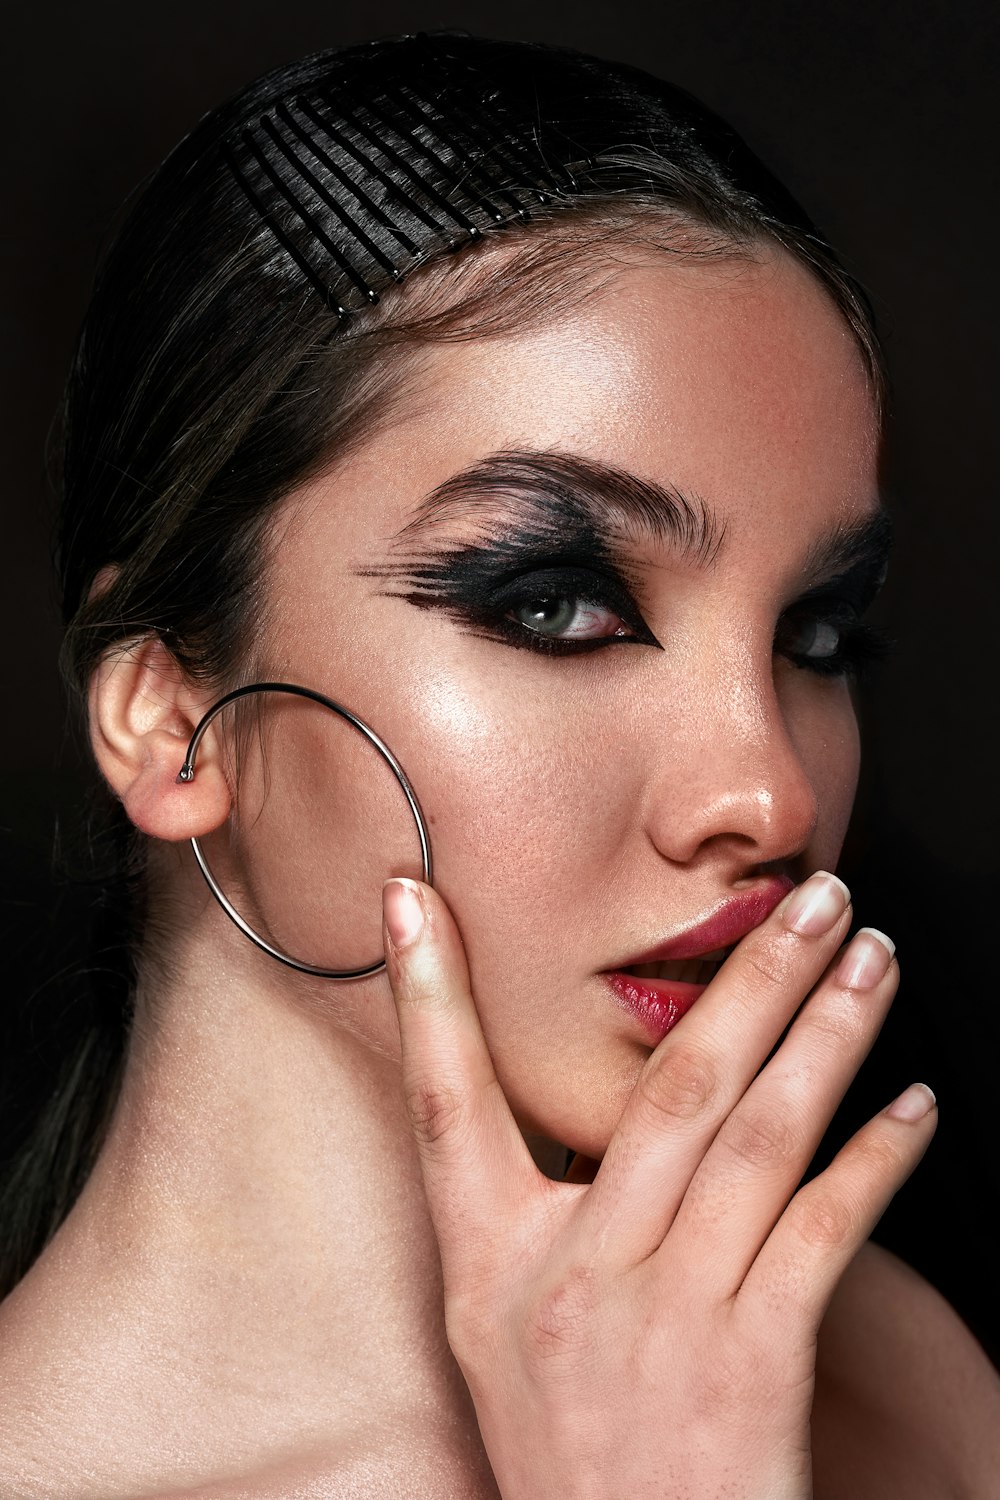 a woman with black makeup and hoop earrings